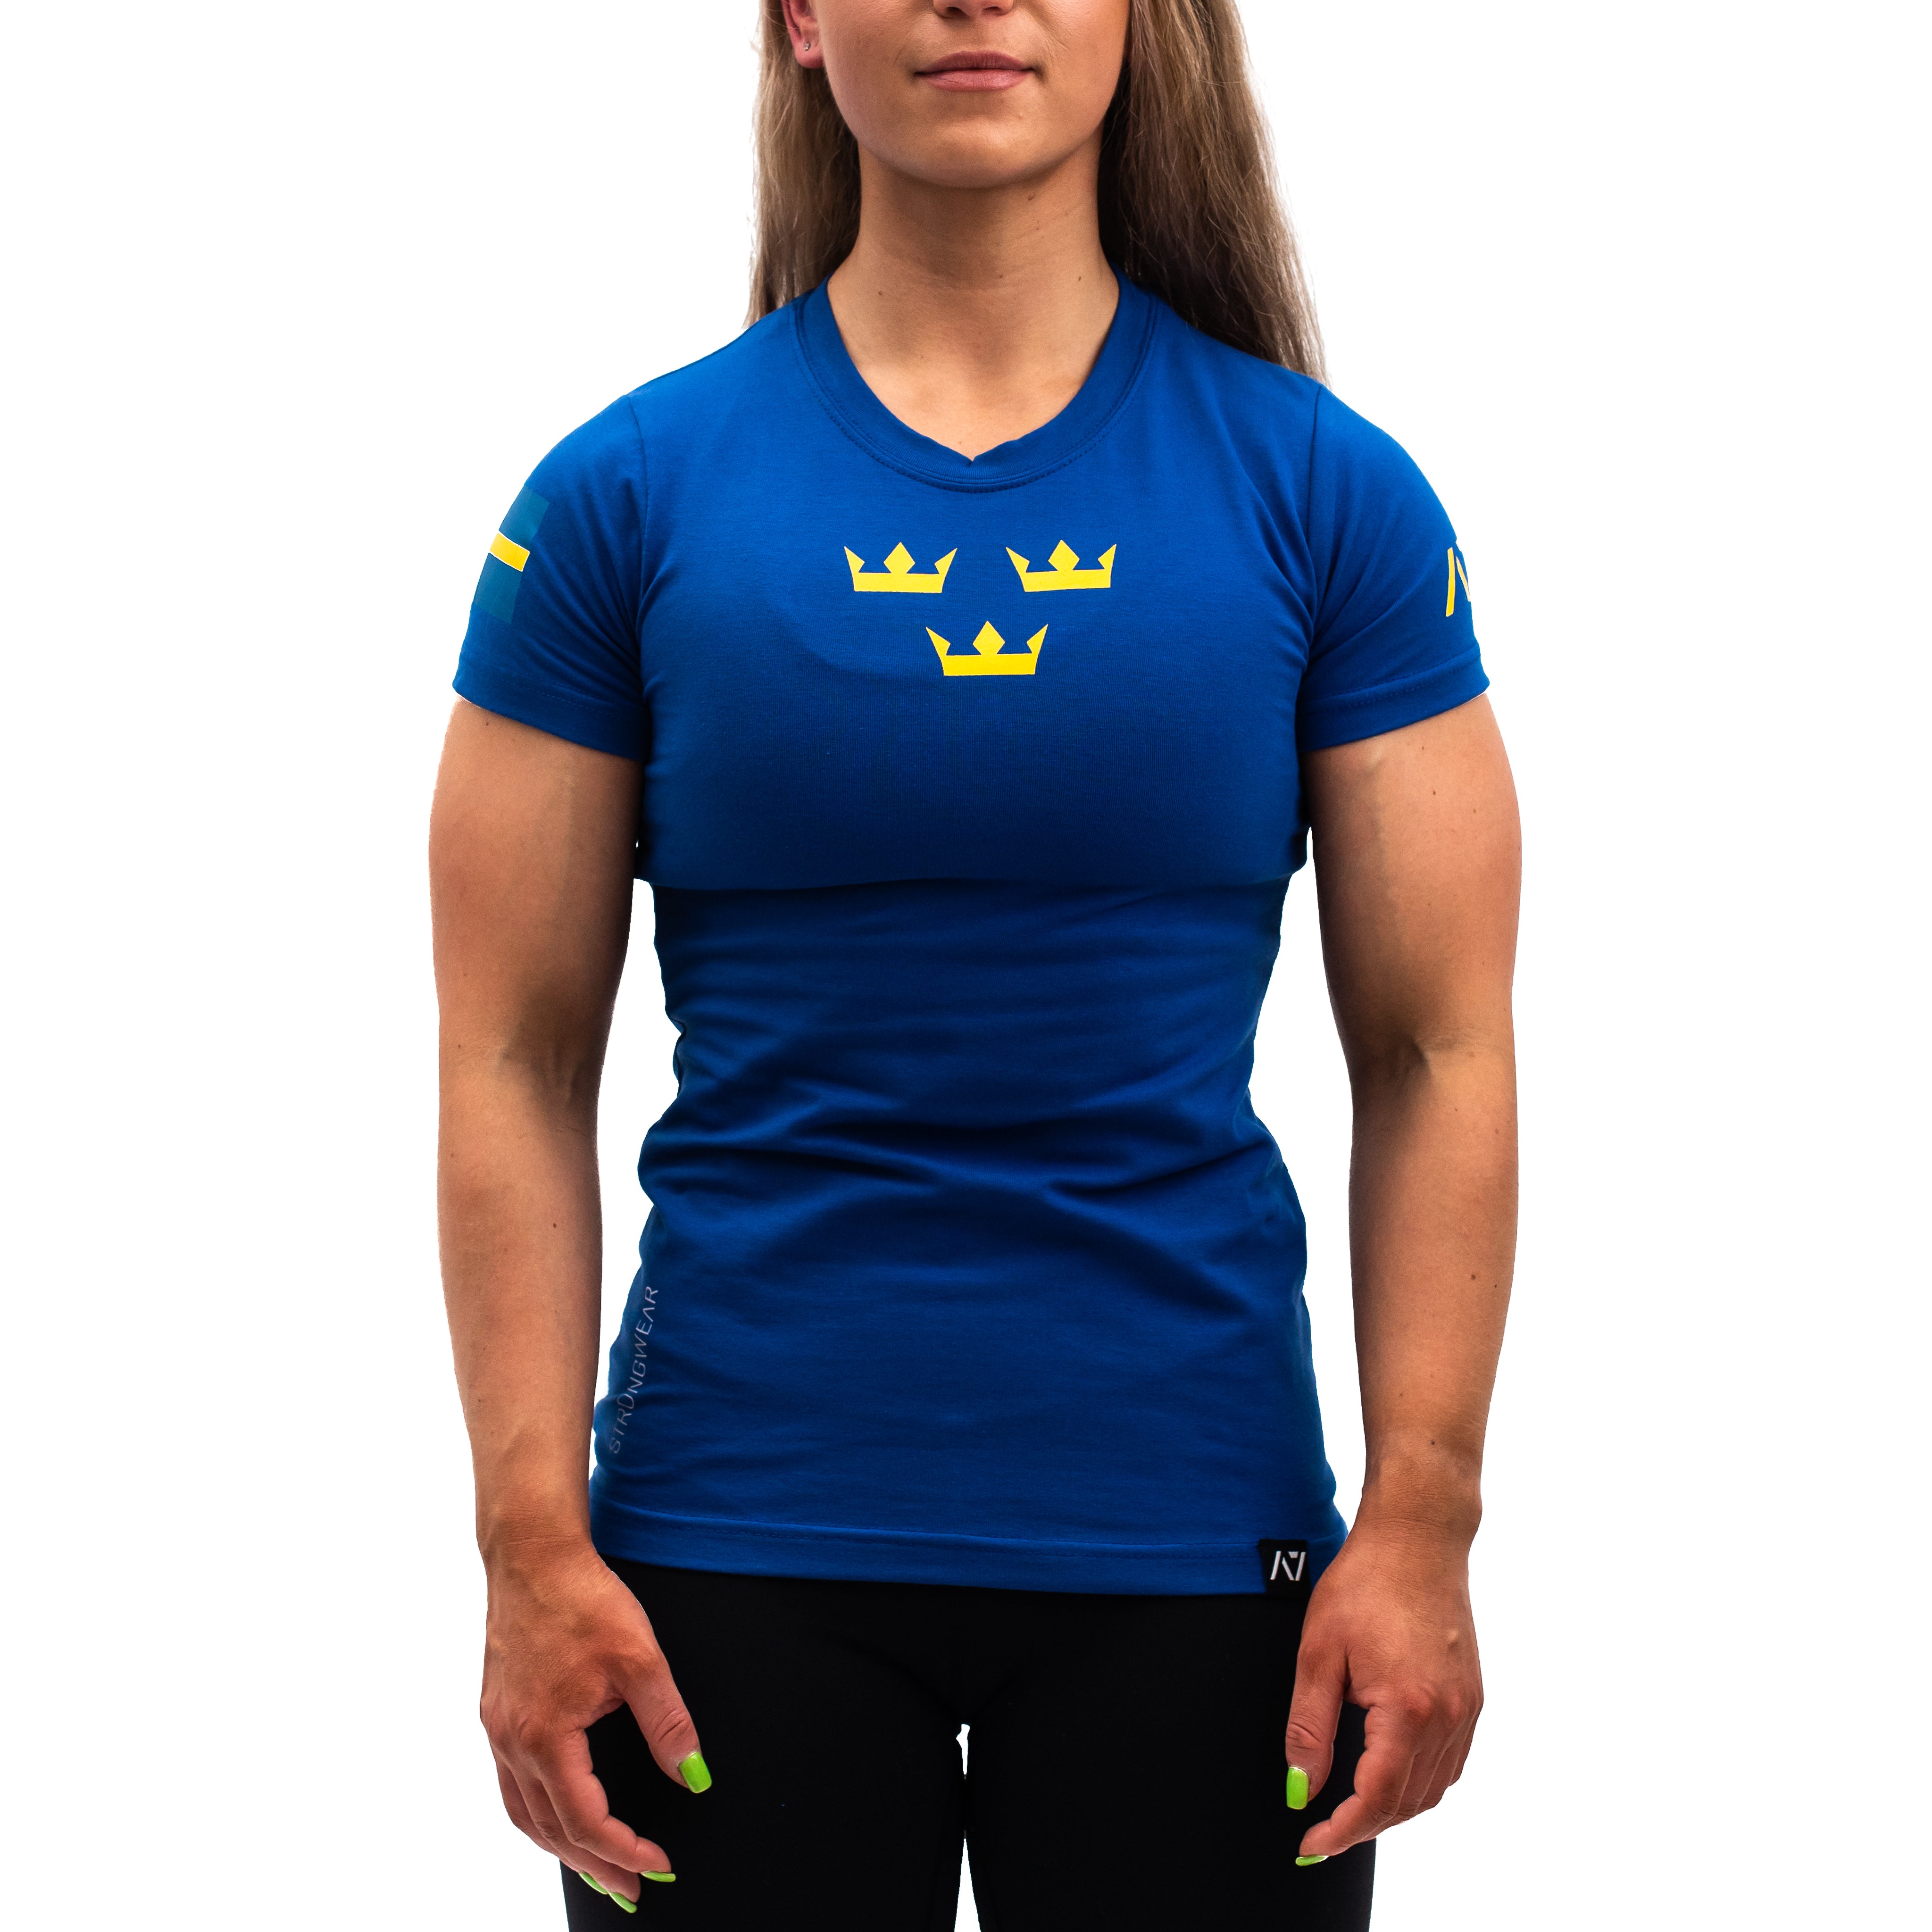  When you step on the platform and want to leave no doubt about your expectations and that you “Demand Greatness” on every lift, the A7 Sweden Meet Shirt lets everyone know you mean business. Now is your chance to celebrate another “country of strength” with this A7 Sweden Meet Tee. The A7 Sweden Meet Shirt is an essential in any IPF approved kit. You can buy this Sweden IPF Approved meet shirt from A7 UK or A7 Europe. 